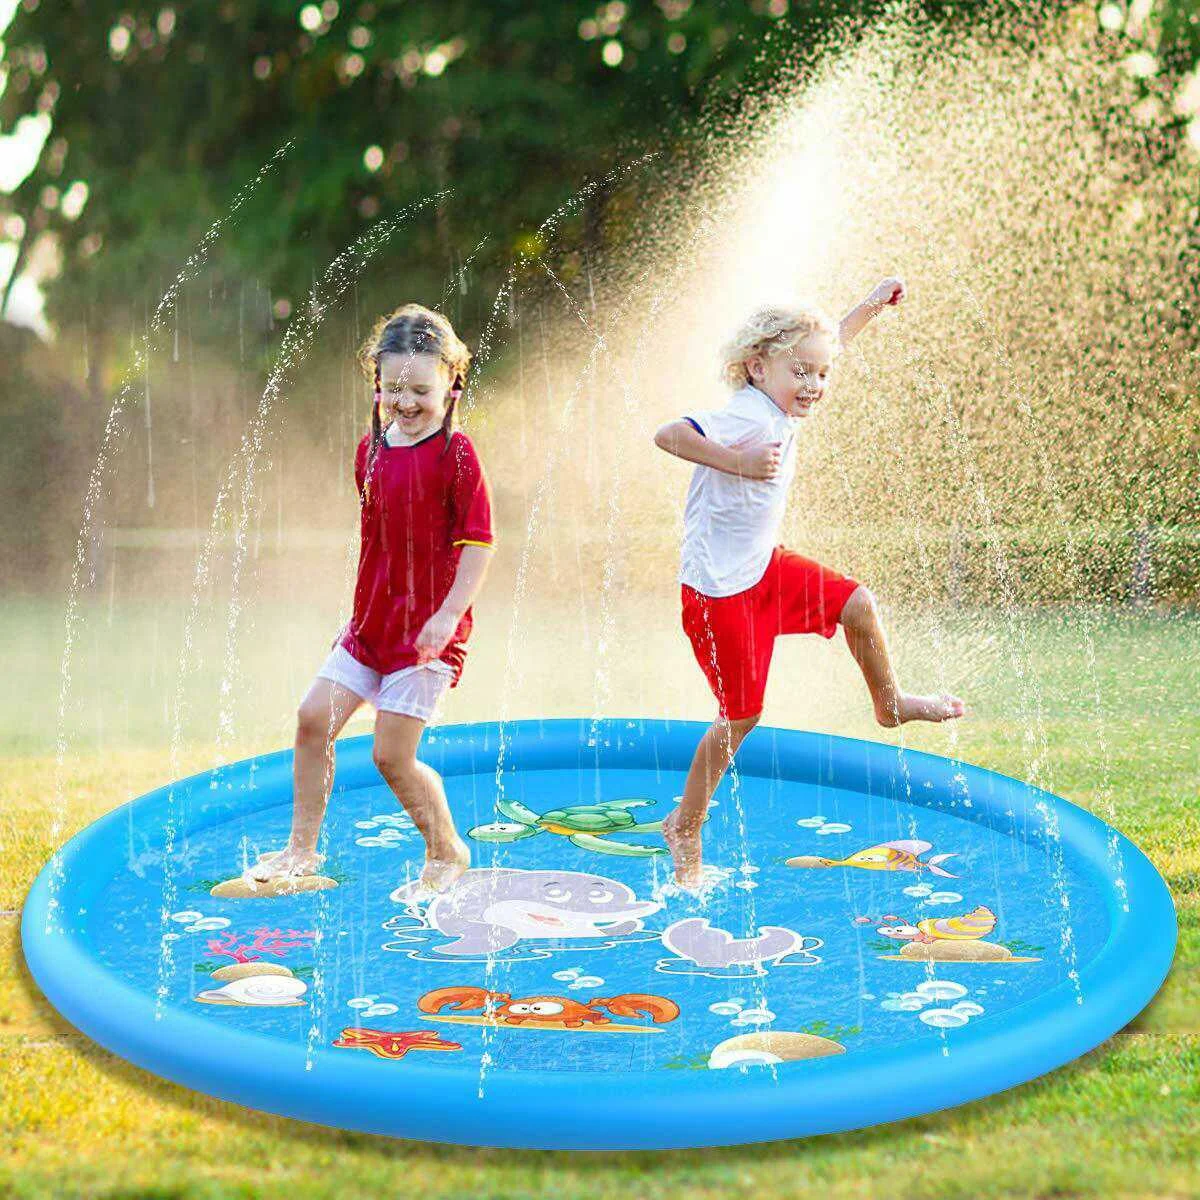 

170cm Inflatable pool Spray Water Cushion Summer toys Water Mat Lawn Games Pad Sprinkler Toys Outdoor Tub Swiming Pool for kids